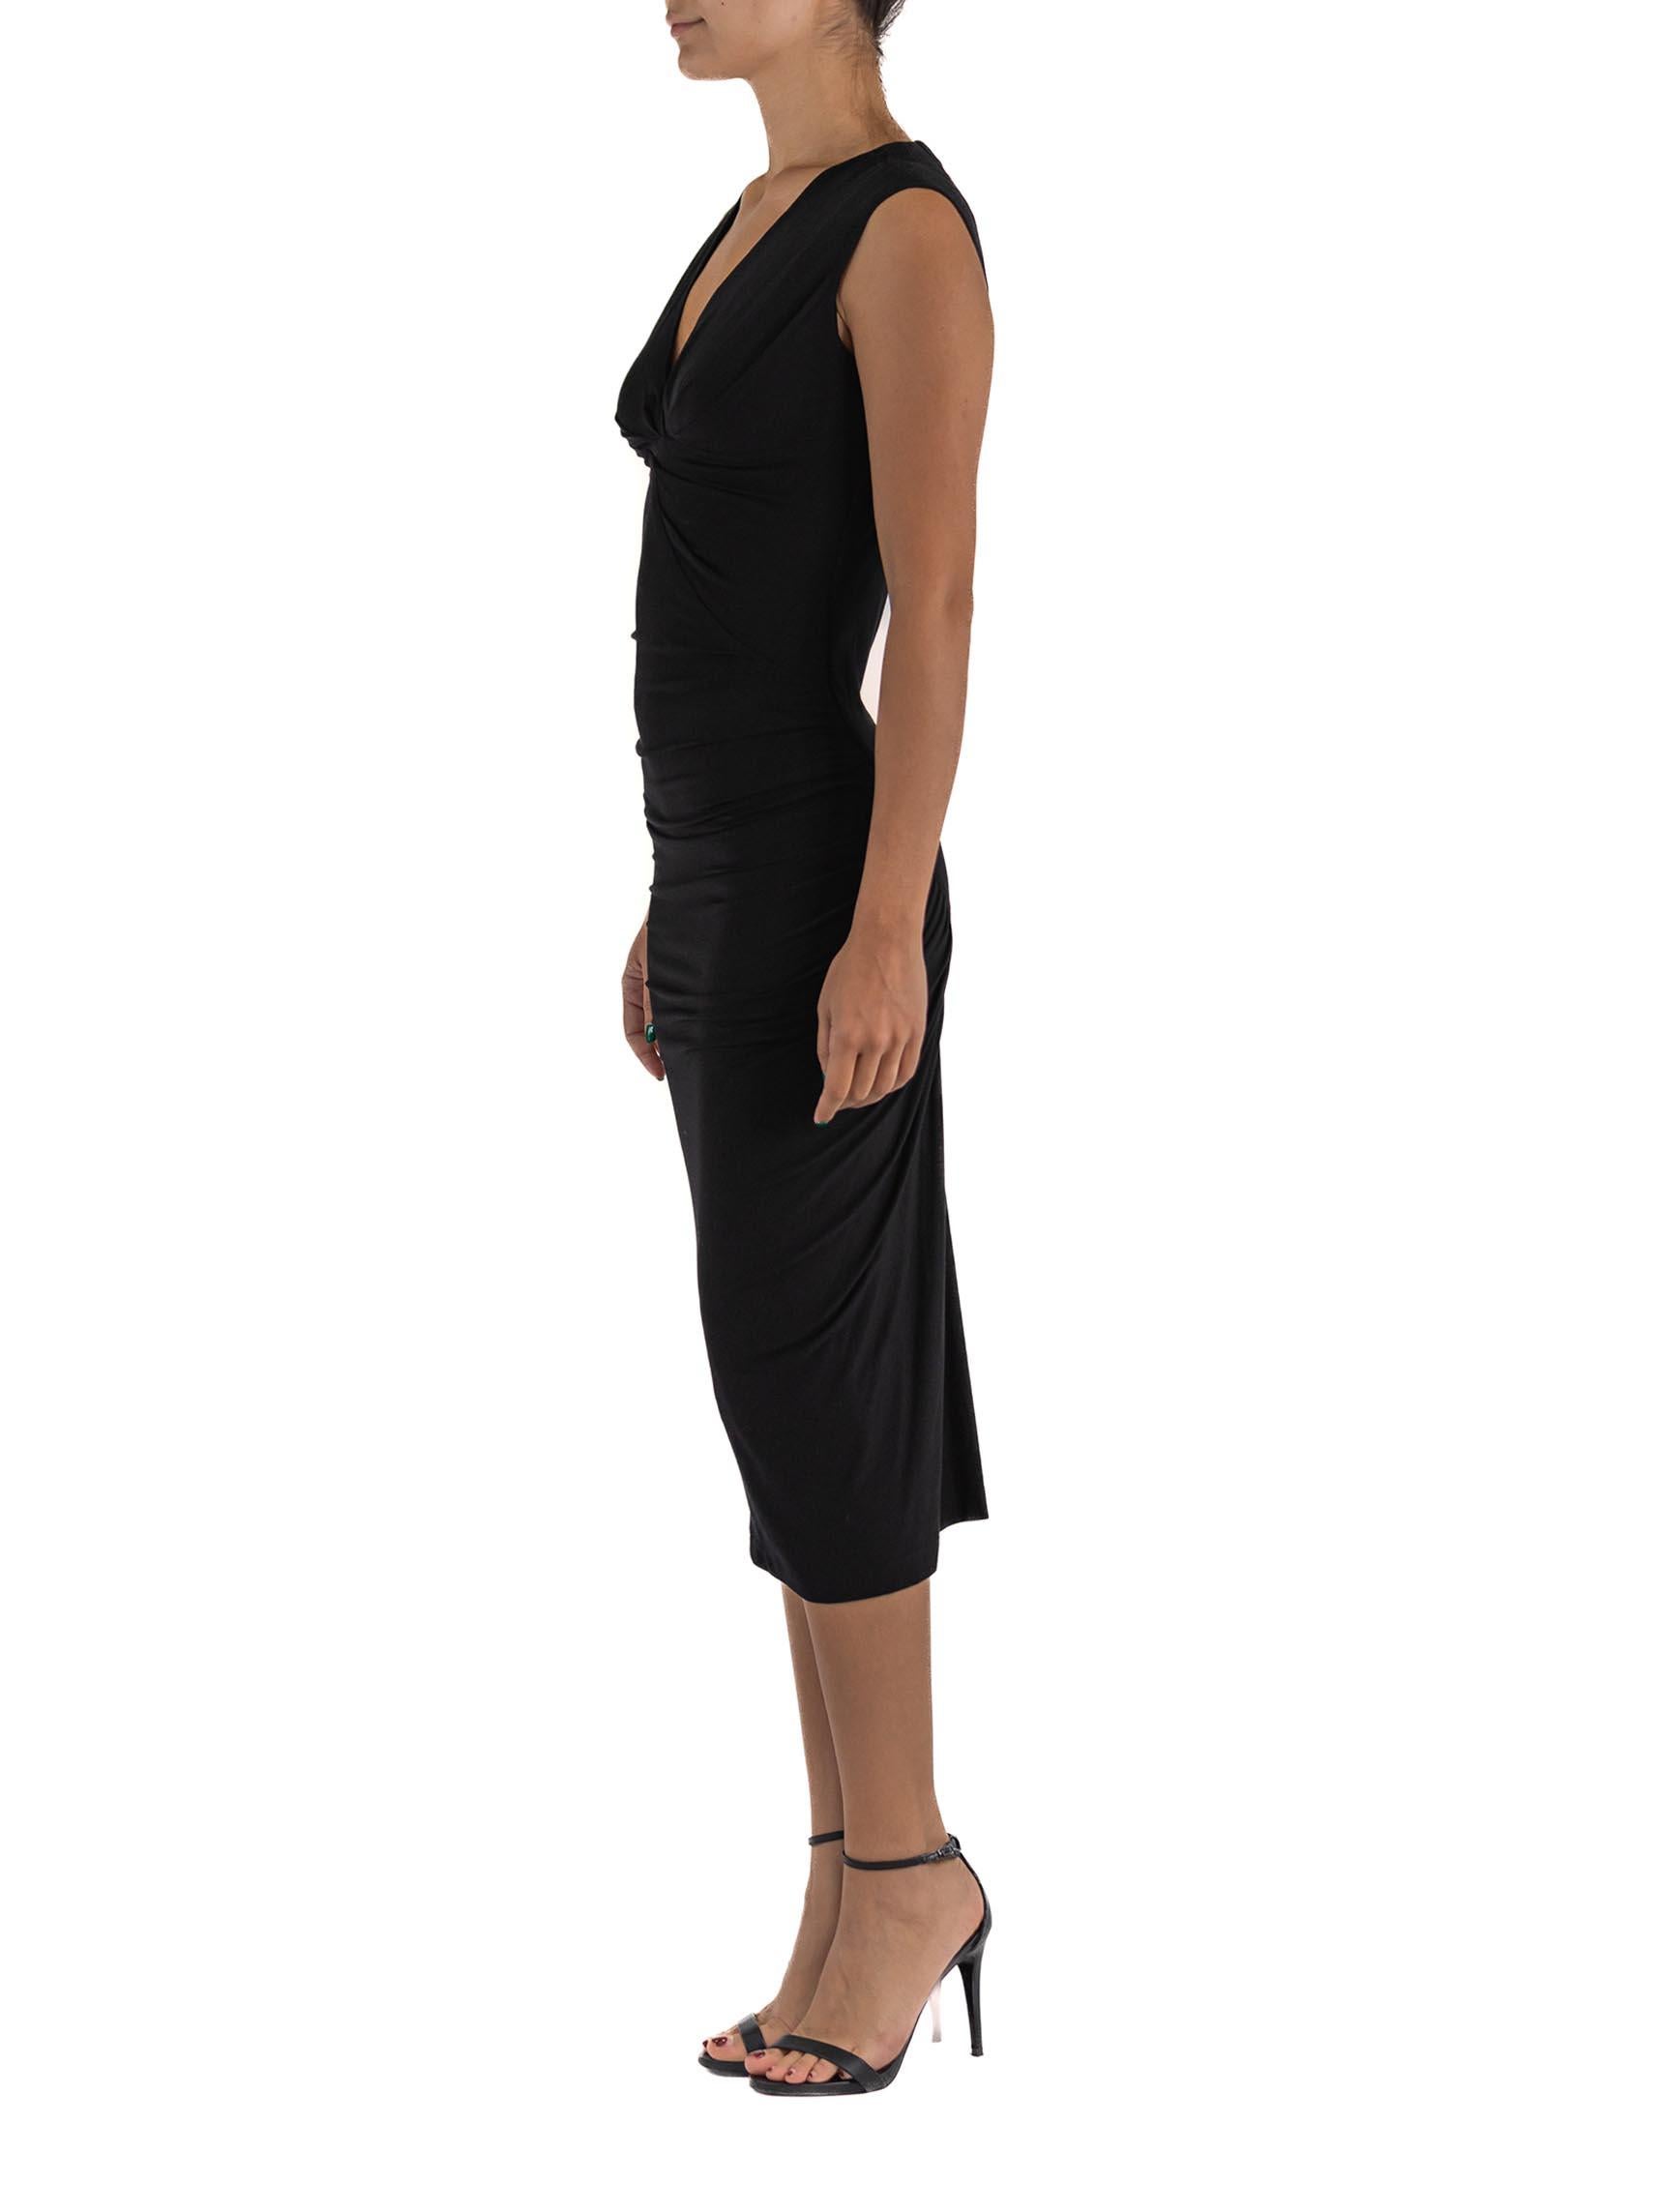 Women's 2000S DONNA KARAN Black Rayon Jersey Side Ruched Long Gown For Sale